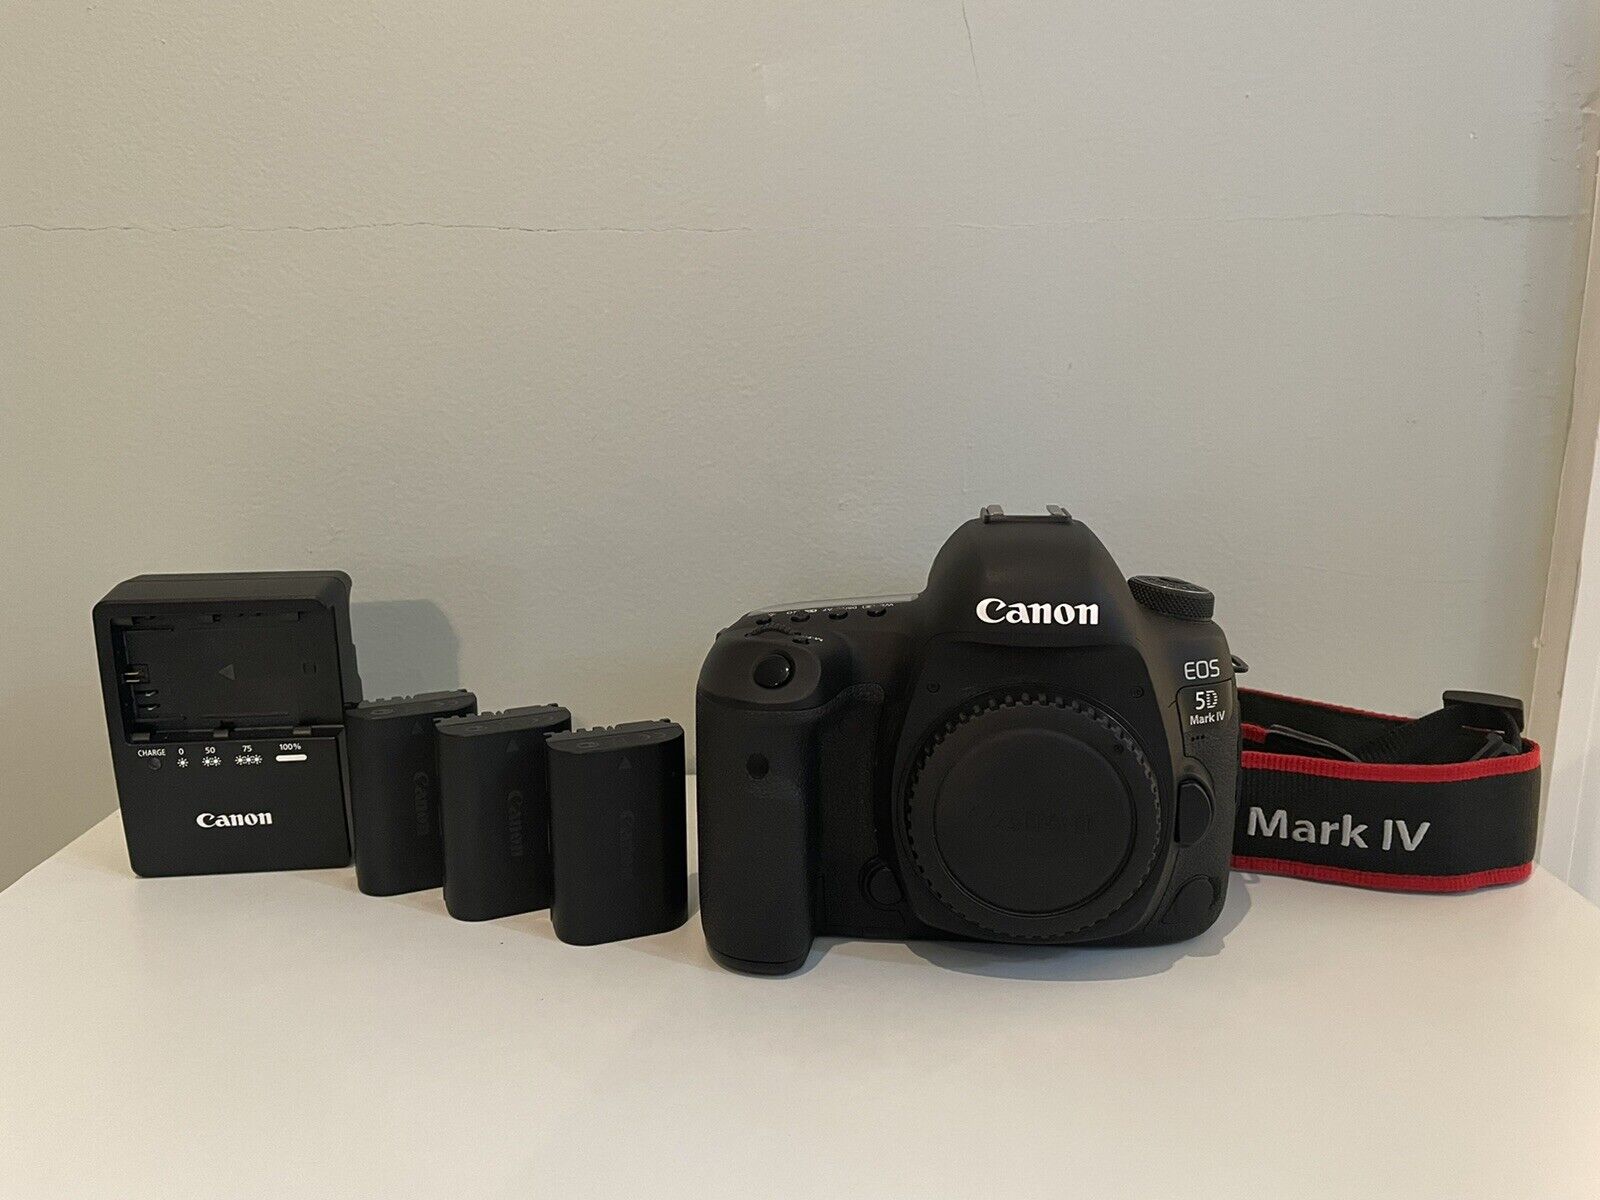 Canon EOS 5D Mark IV 30.4MP Digital SLR Camera - Body Only Great Condition